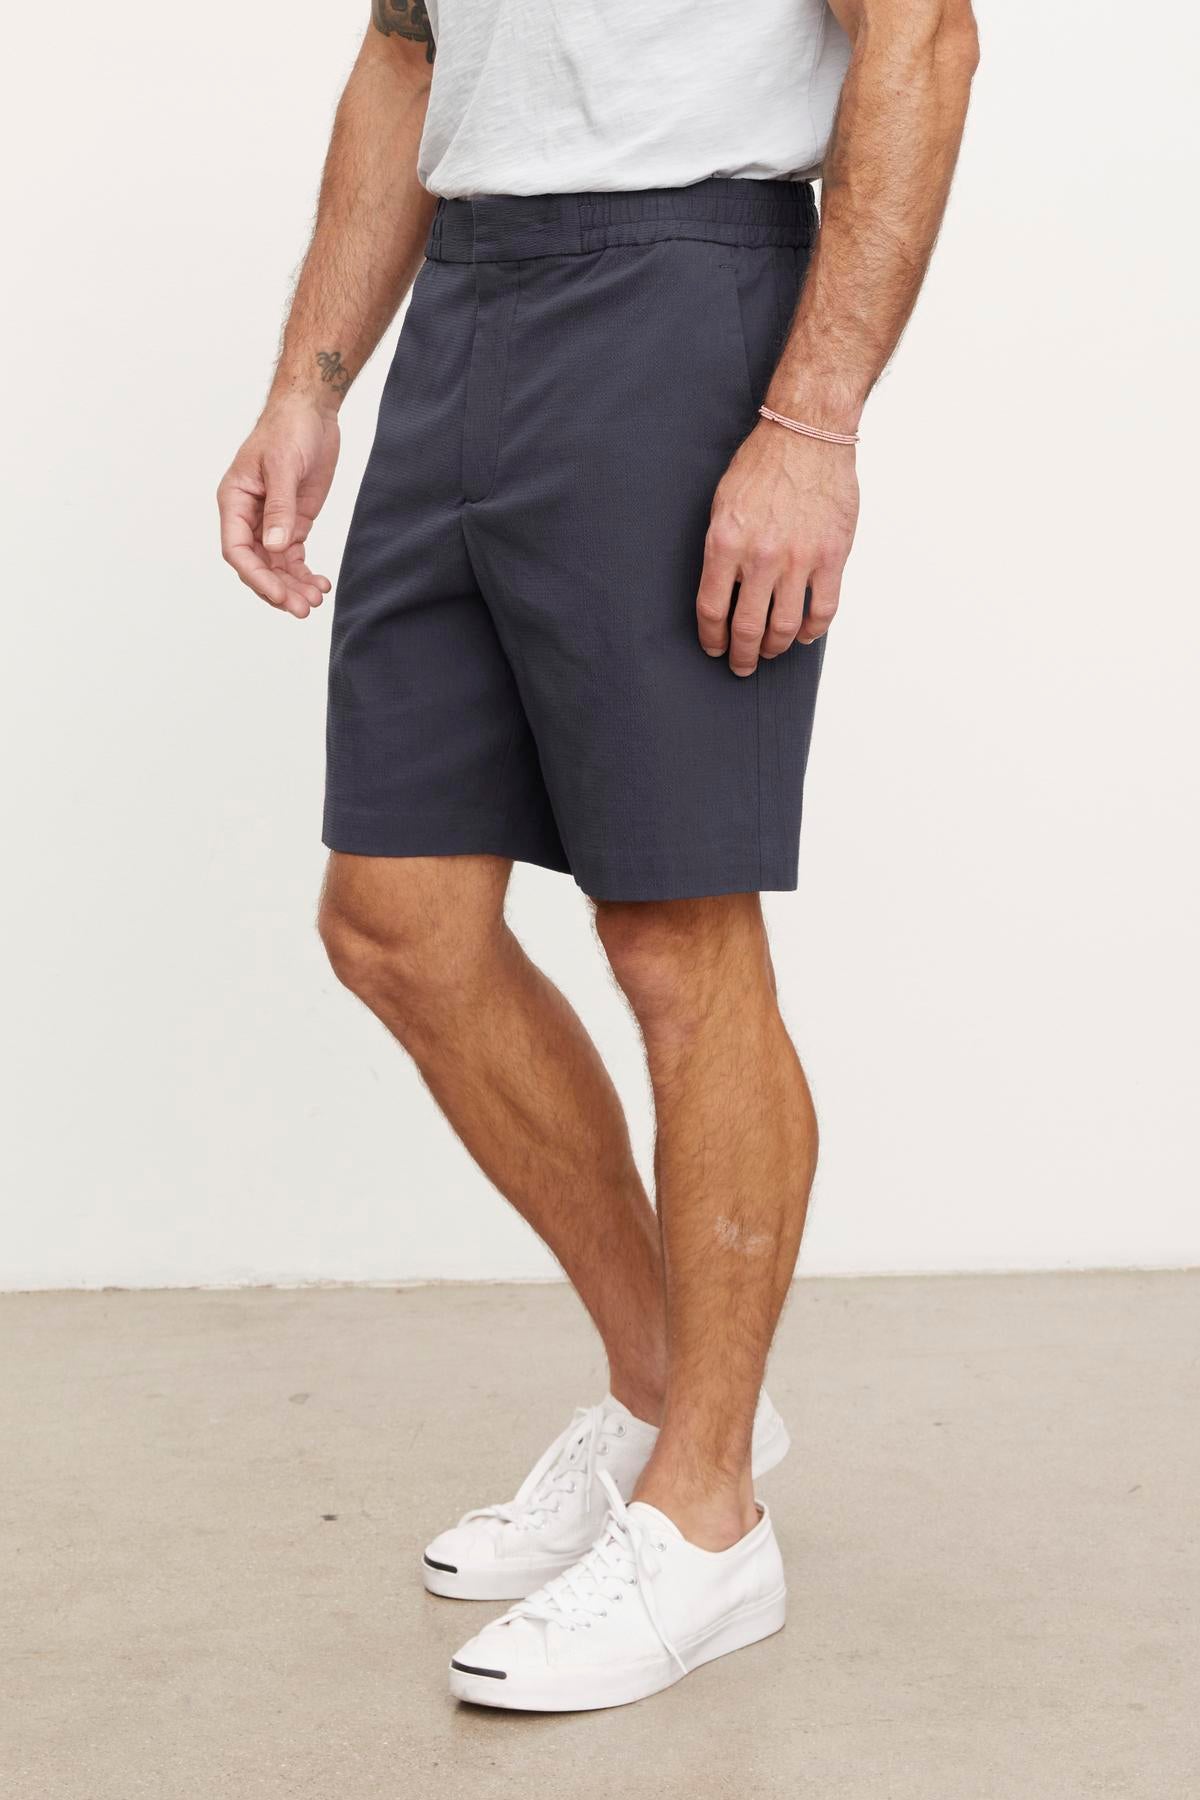 Man standing in a plain background wearing a gray pair of Velvet by Graham & Spencer DAMIAN shorts and white sneakers, showing from waist to shoes.-36890695958721